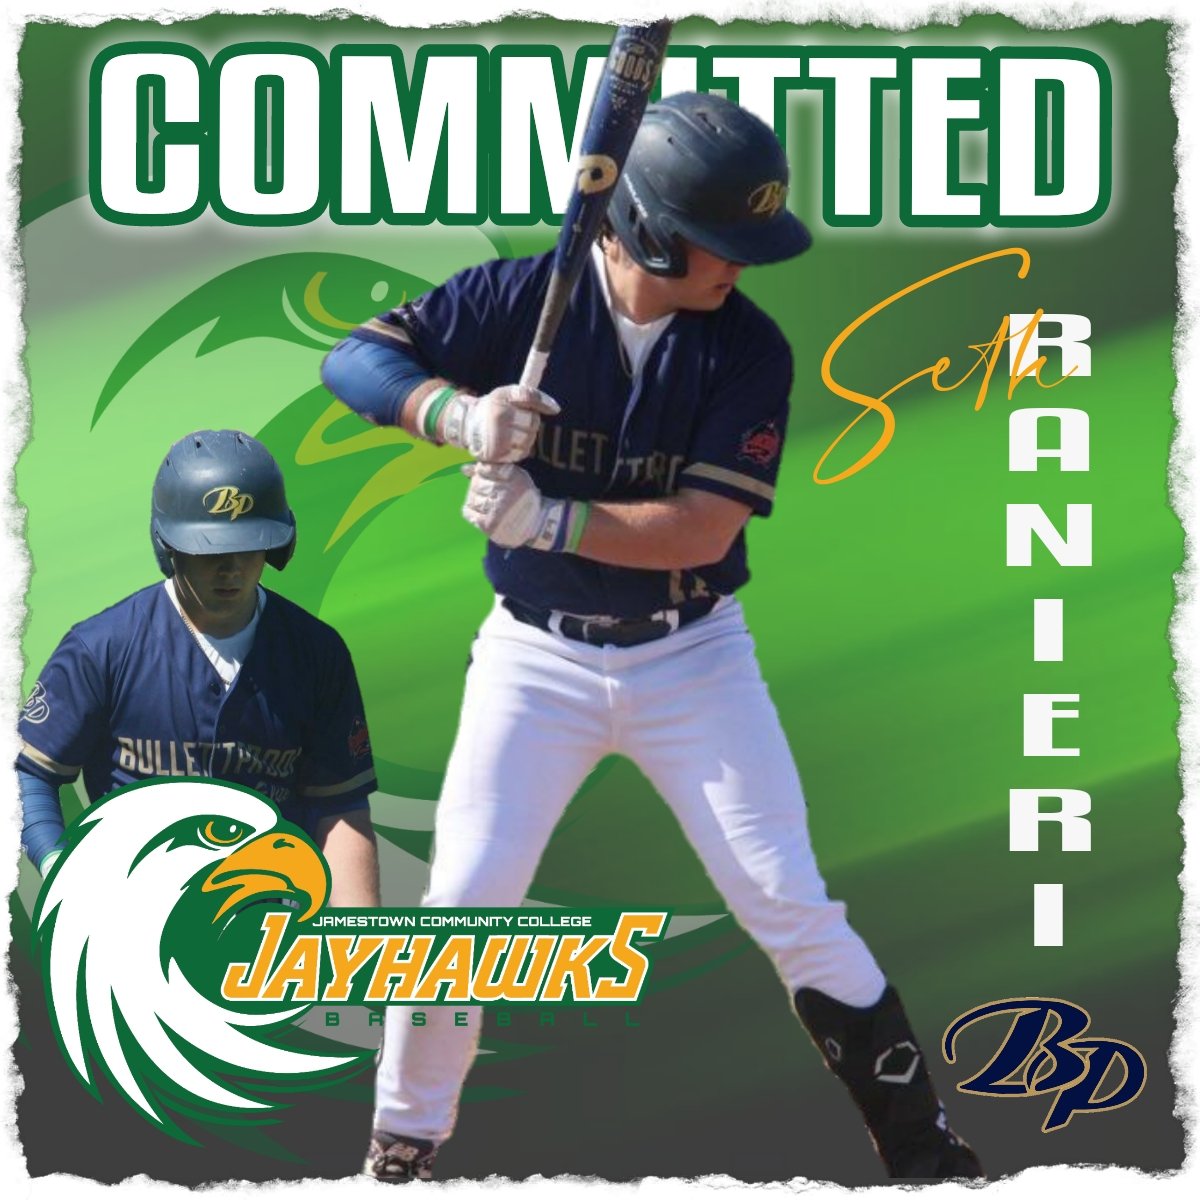 Congratulations to BP Elite's INF @SethRanieri on his commitment to continue his athletic and academic aspirations at Jamestown Community College NJCAA D3 in Jamestown NY. @JCCJayhawksBase got a solid stick in this kid. #rollhawks